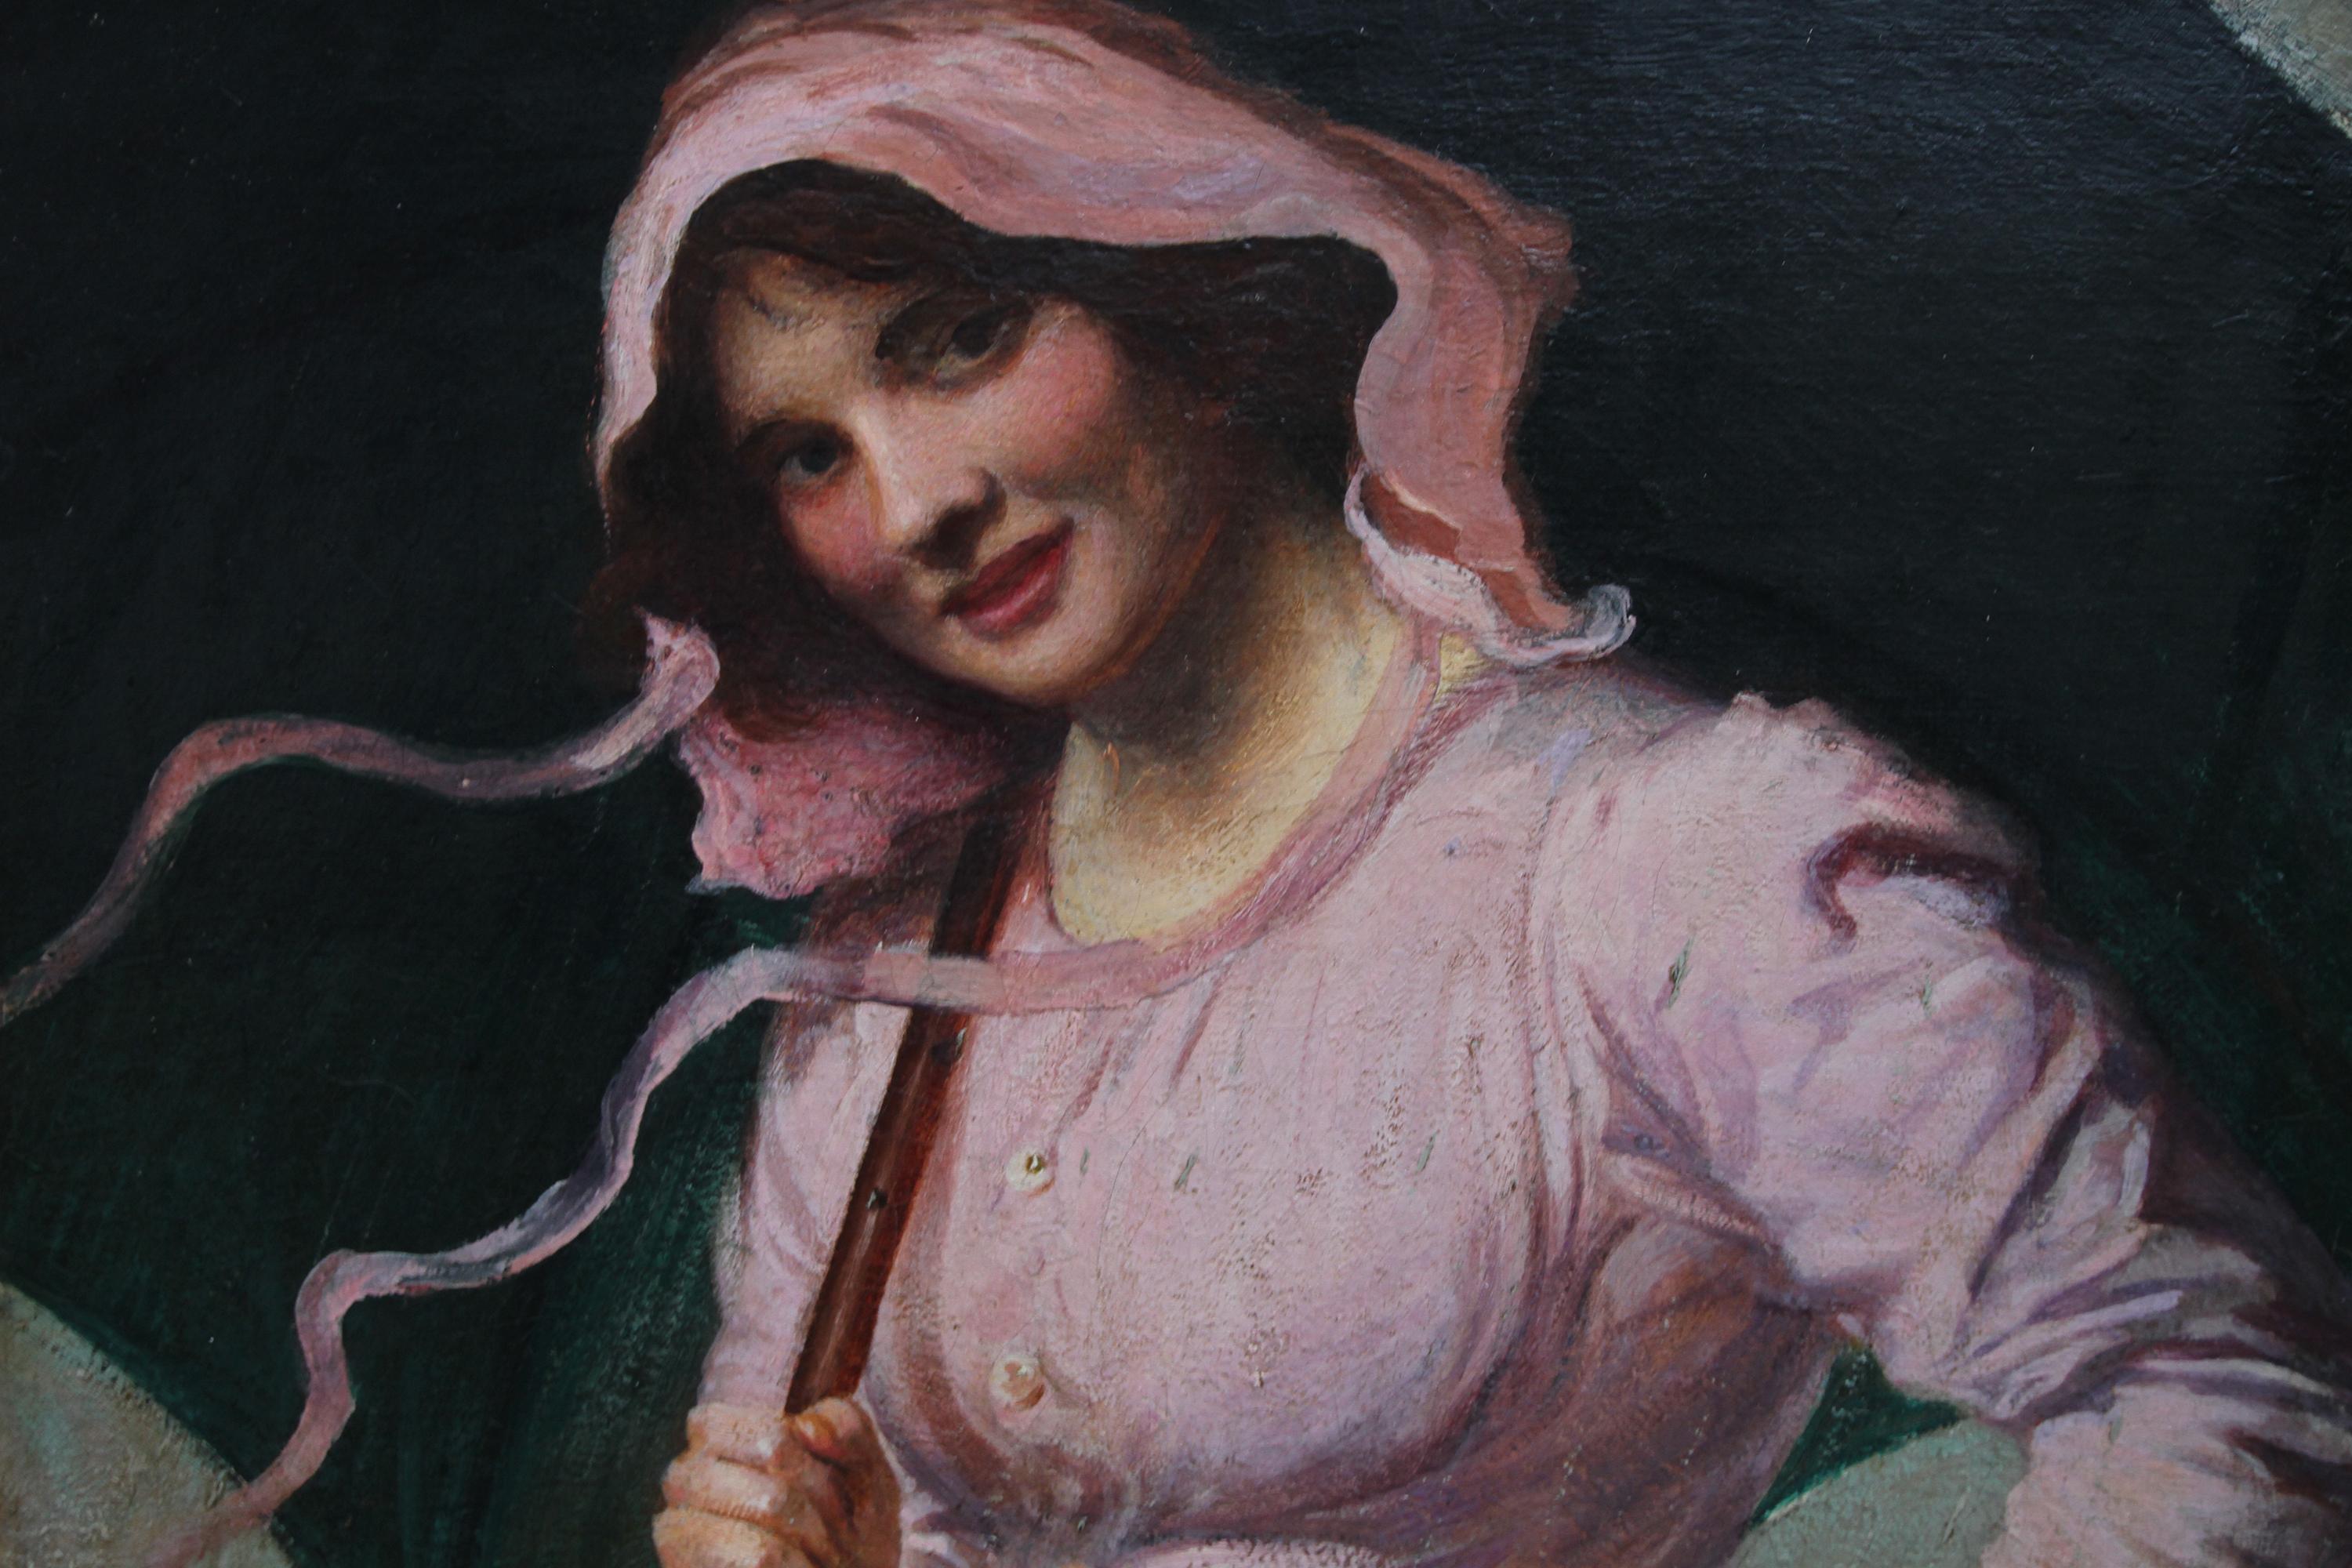 A lovely portrait oil painting by British listed artist Tom Mostyn ROI. Painted circa 1910 it depicts a beautiful smiling young woman in a pink dress holding an umbrella. A glorious portrait by a noted British Impressionist of the day. This is a